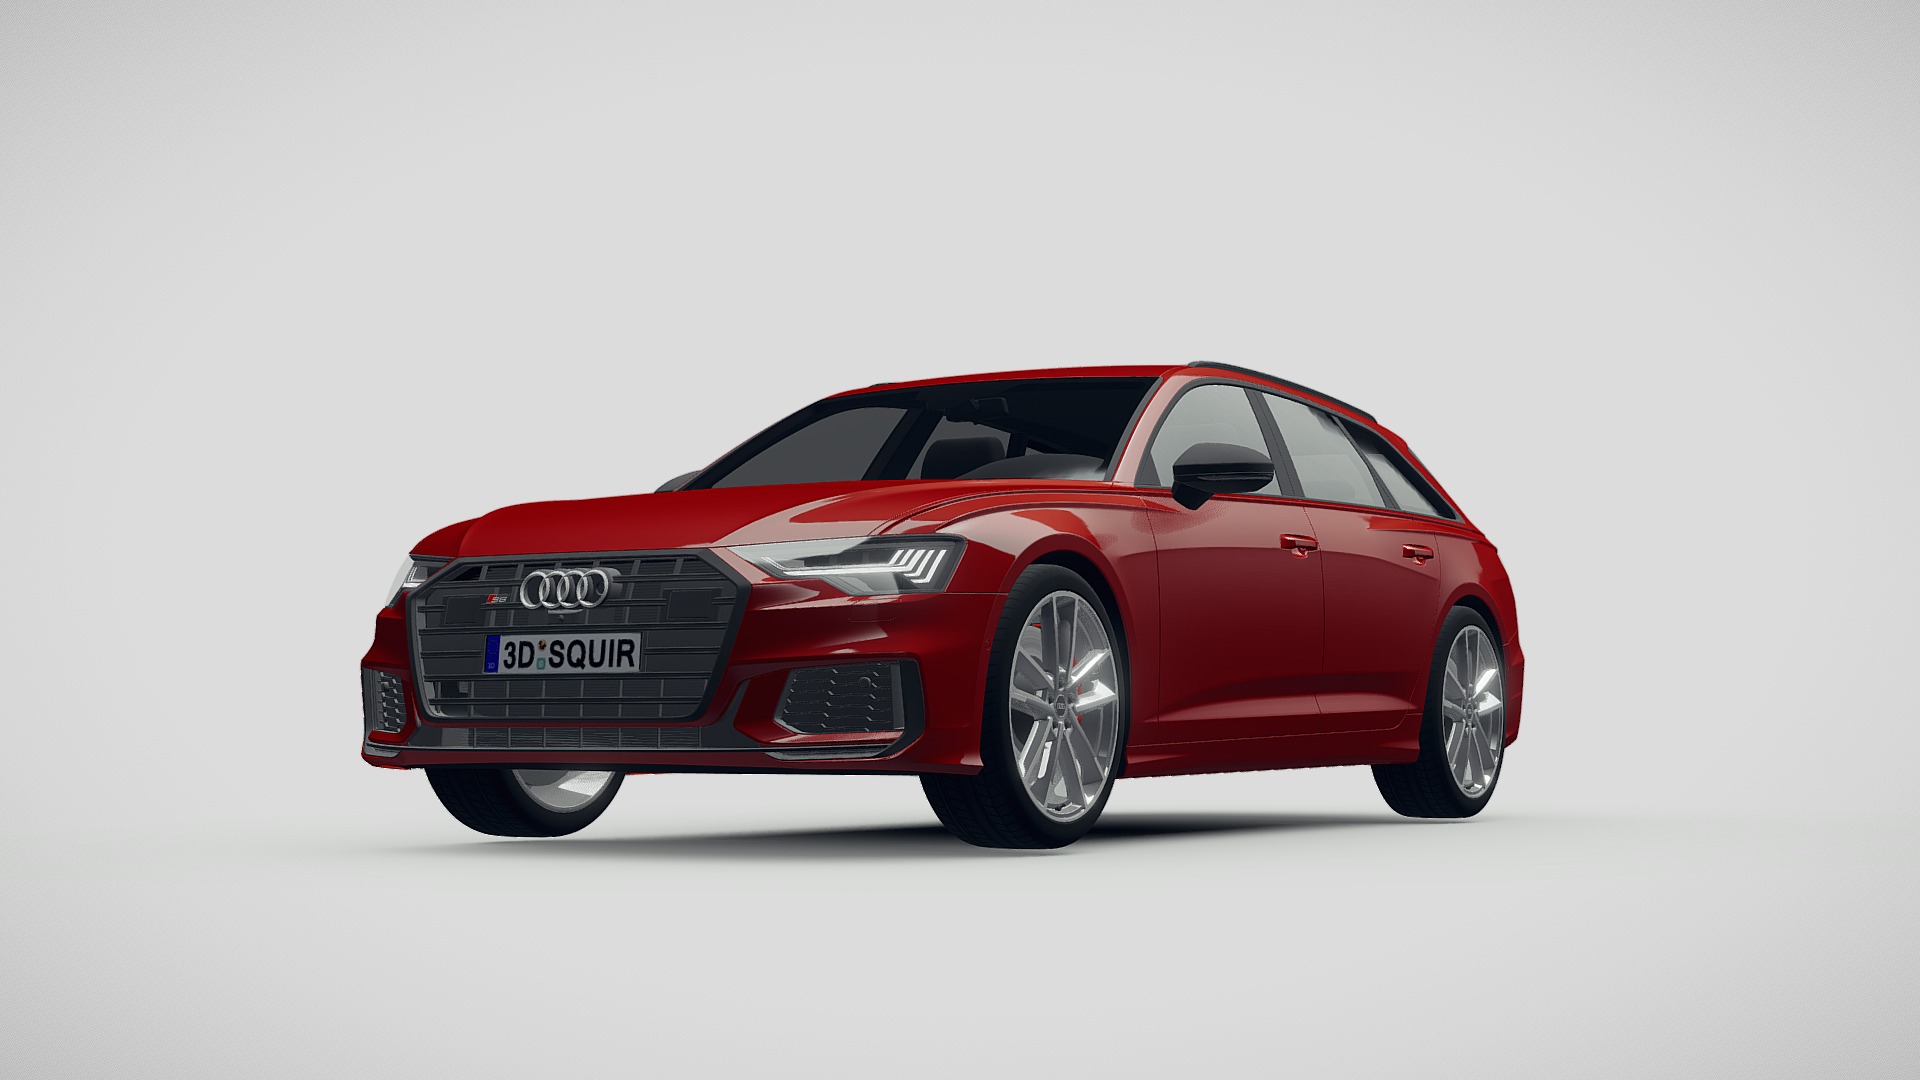 3D model Audi S6 Avant 2020 - This is a 3D model of the Audi S6 Avant 2020. The 3D model is about a red car with a white background.